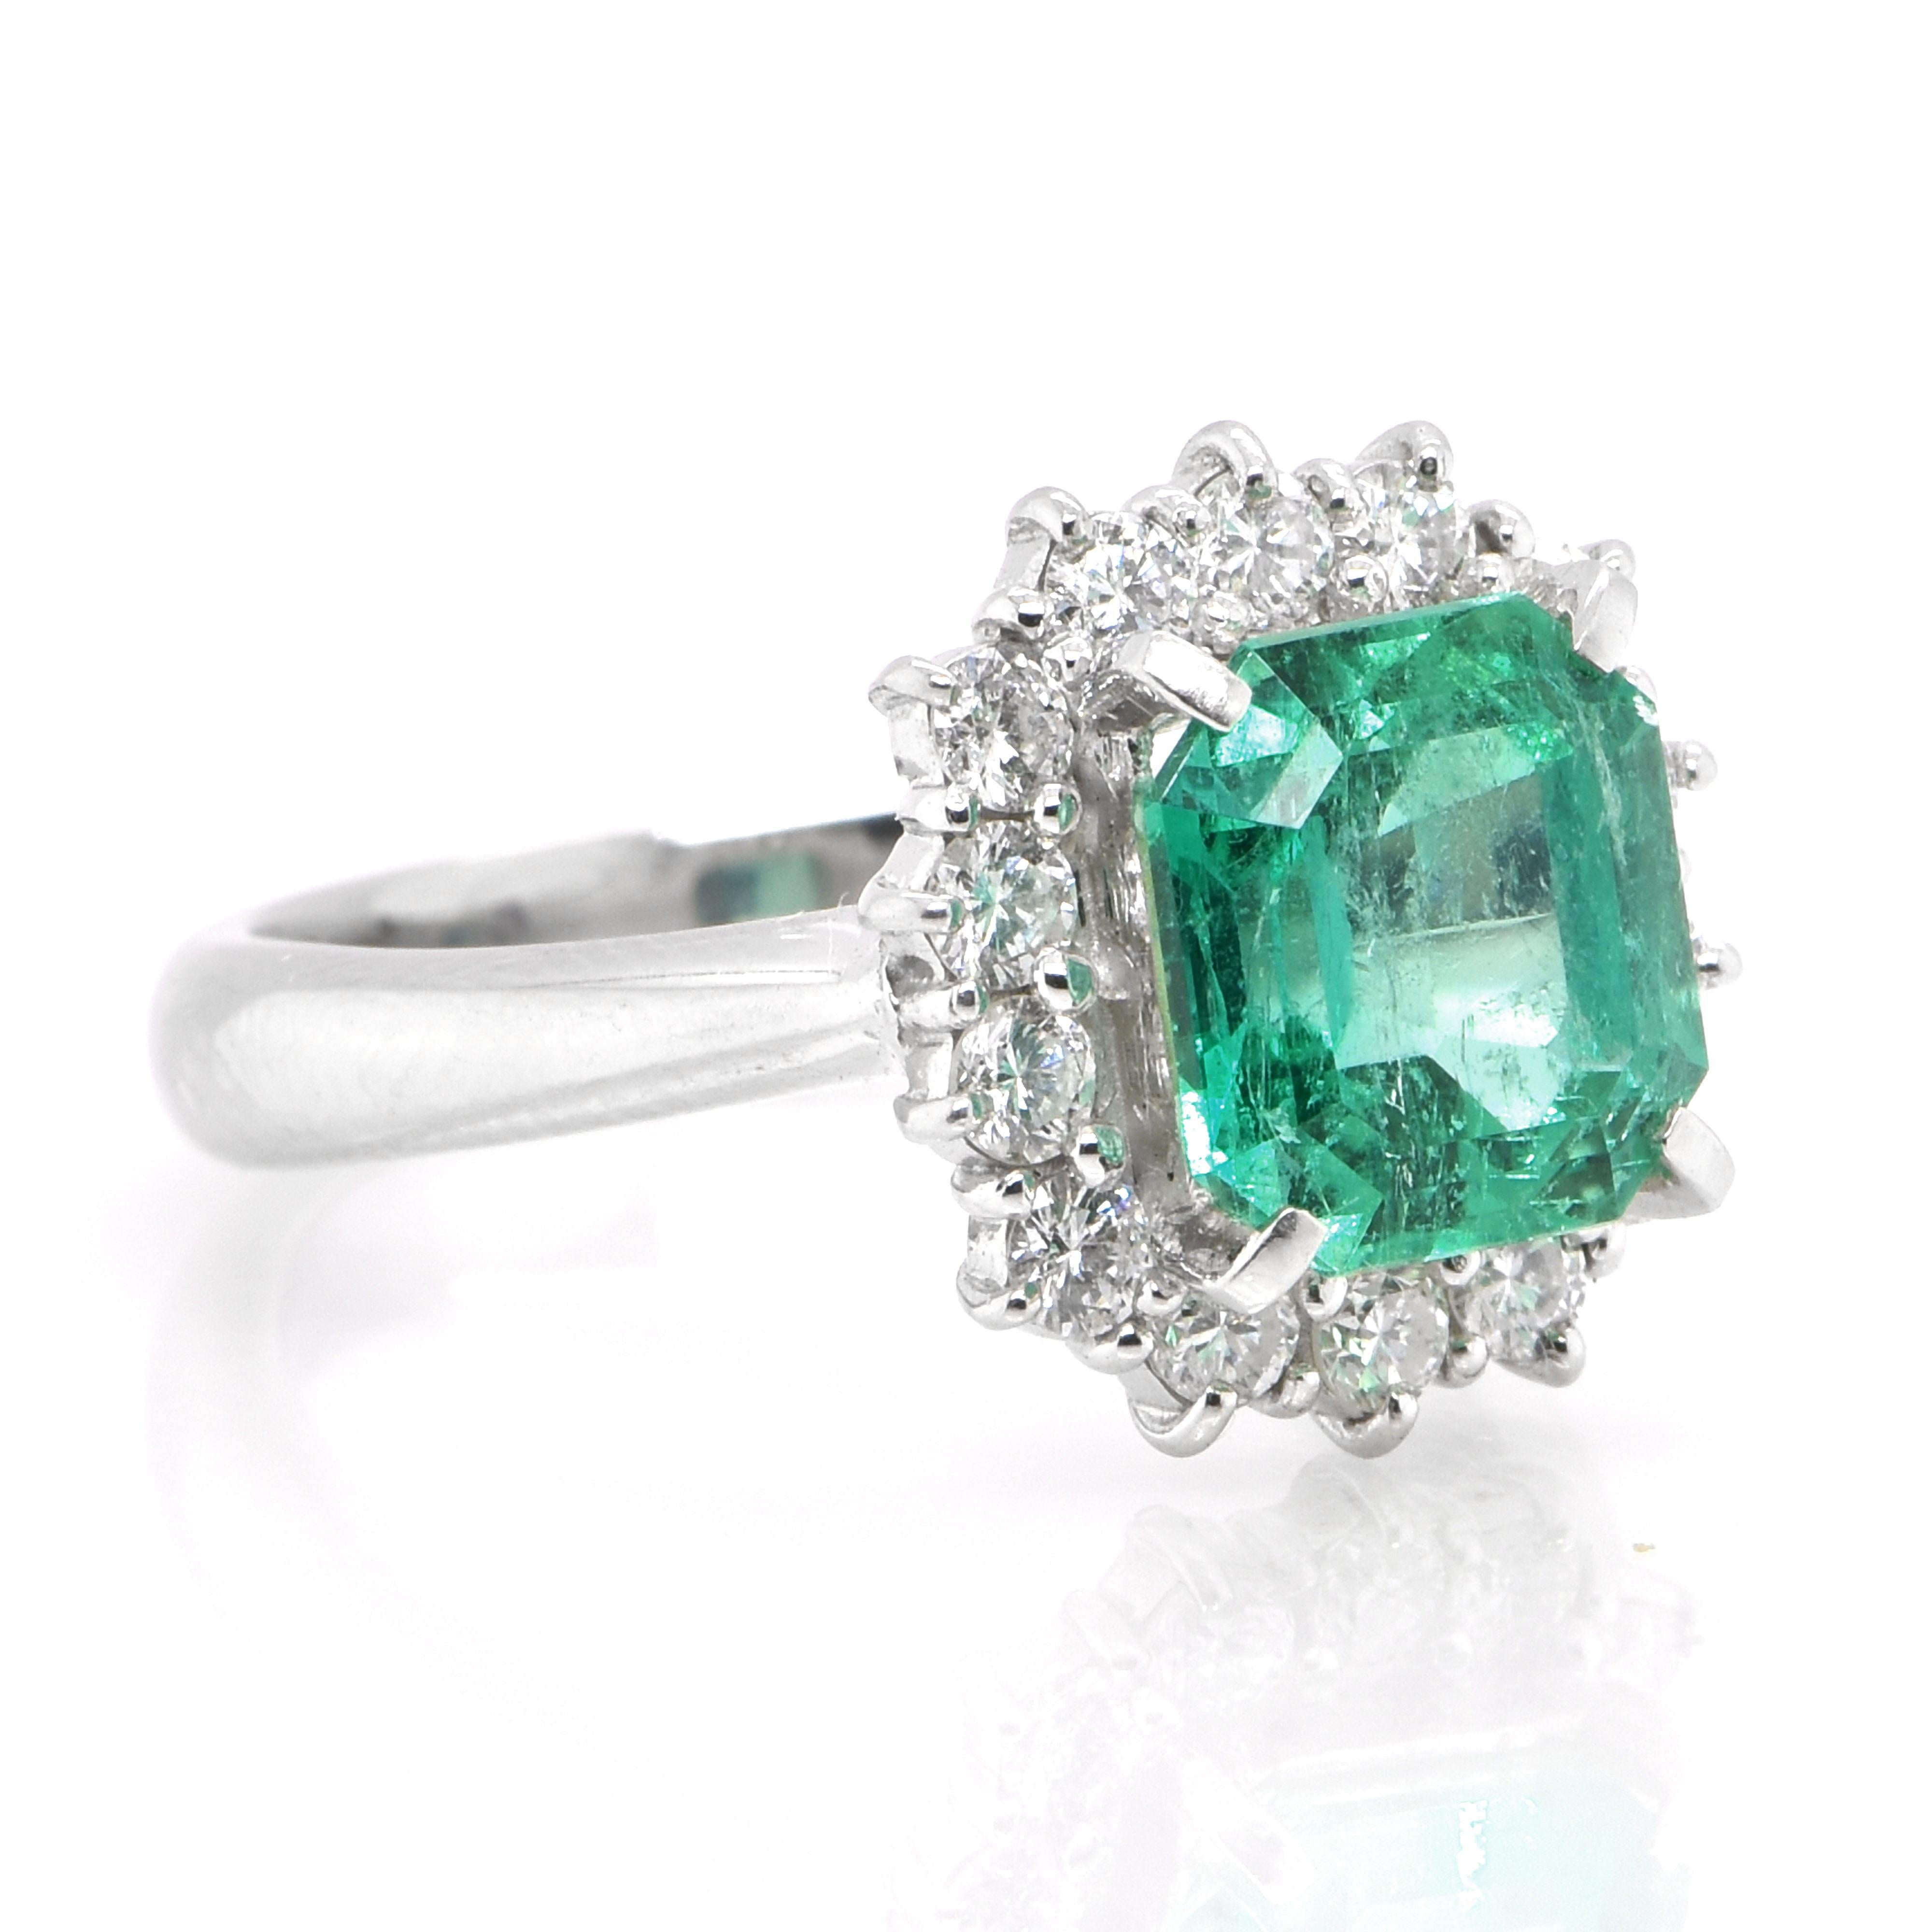 Modern 2.79 Carat Natural Colombian Emerald and Diamond Halo Ring Set in Platinum